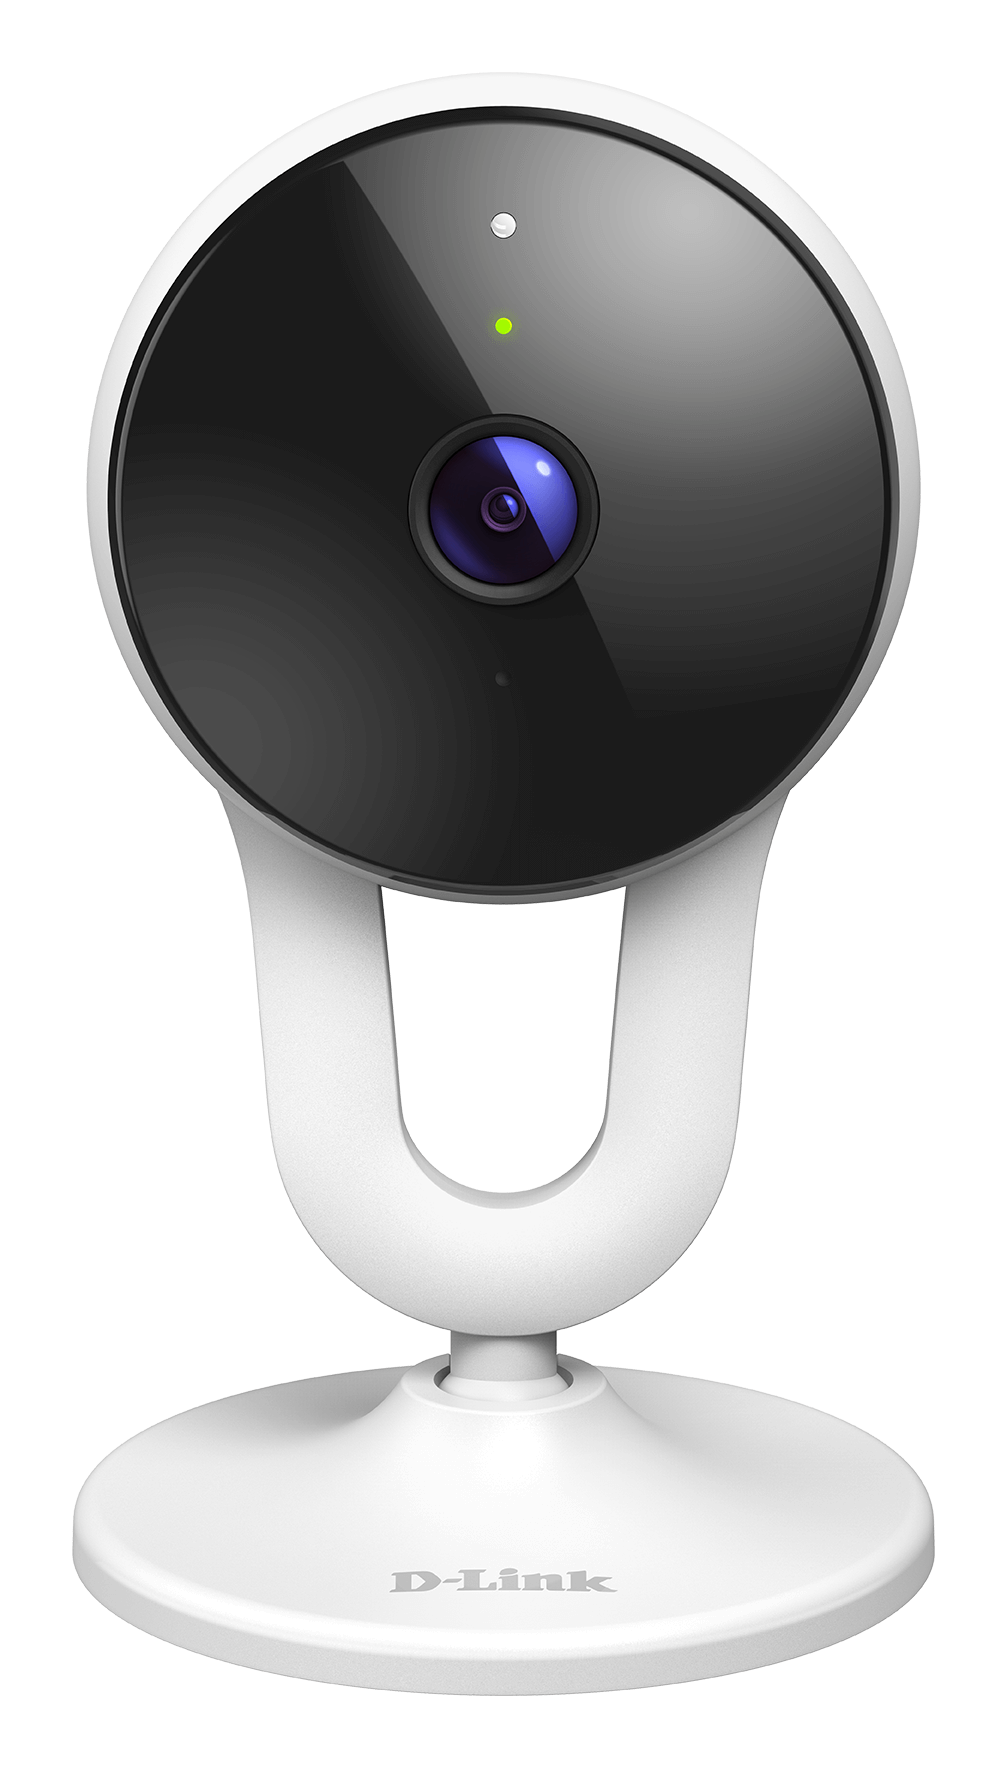 DCS-8300:H Full HD Wi-Fi Camera - Front view.